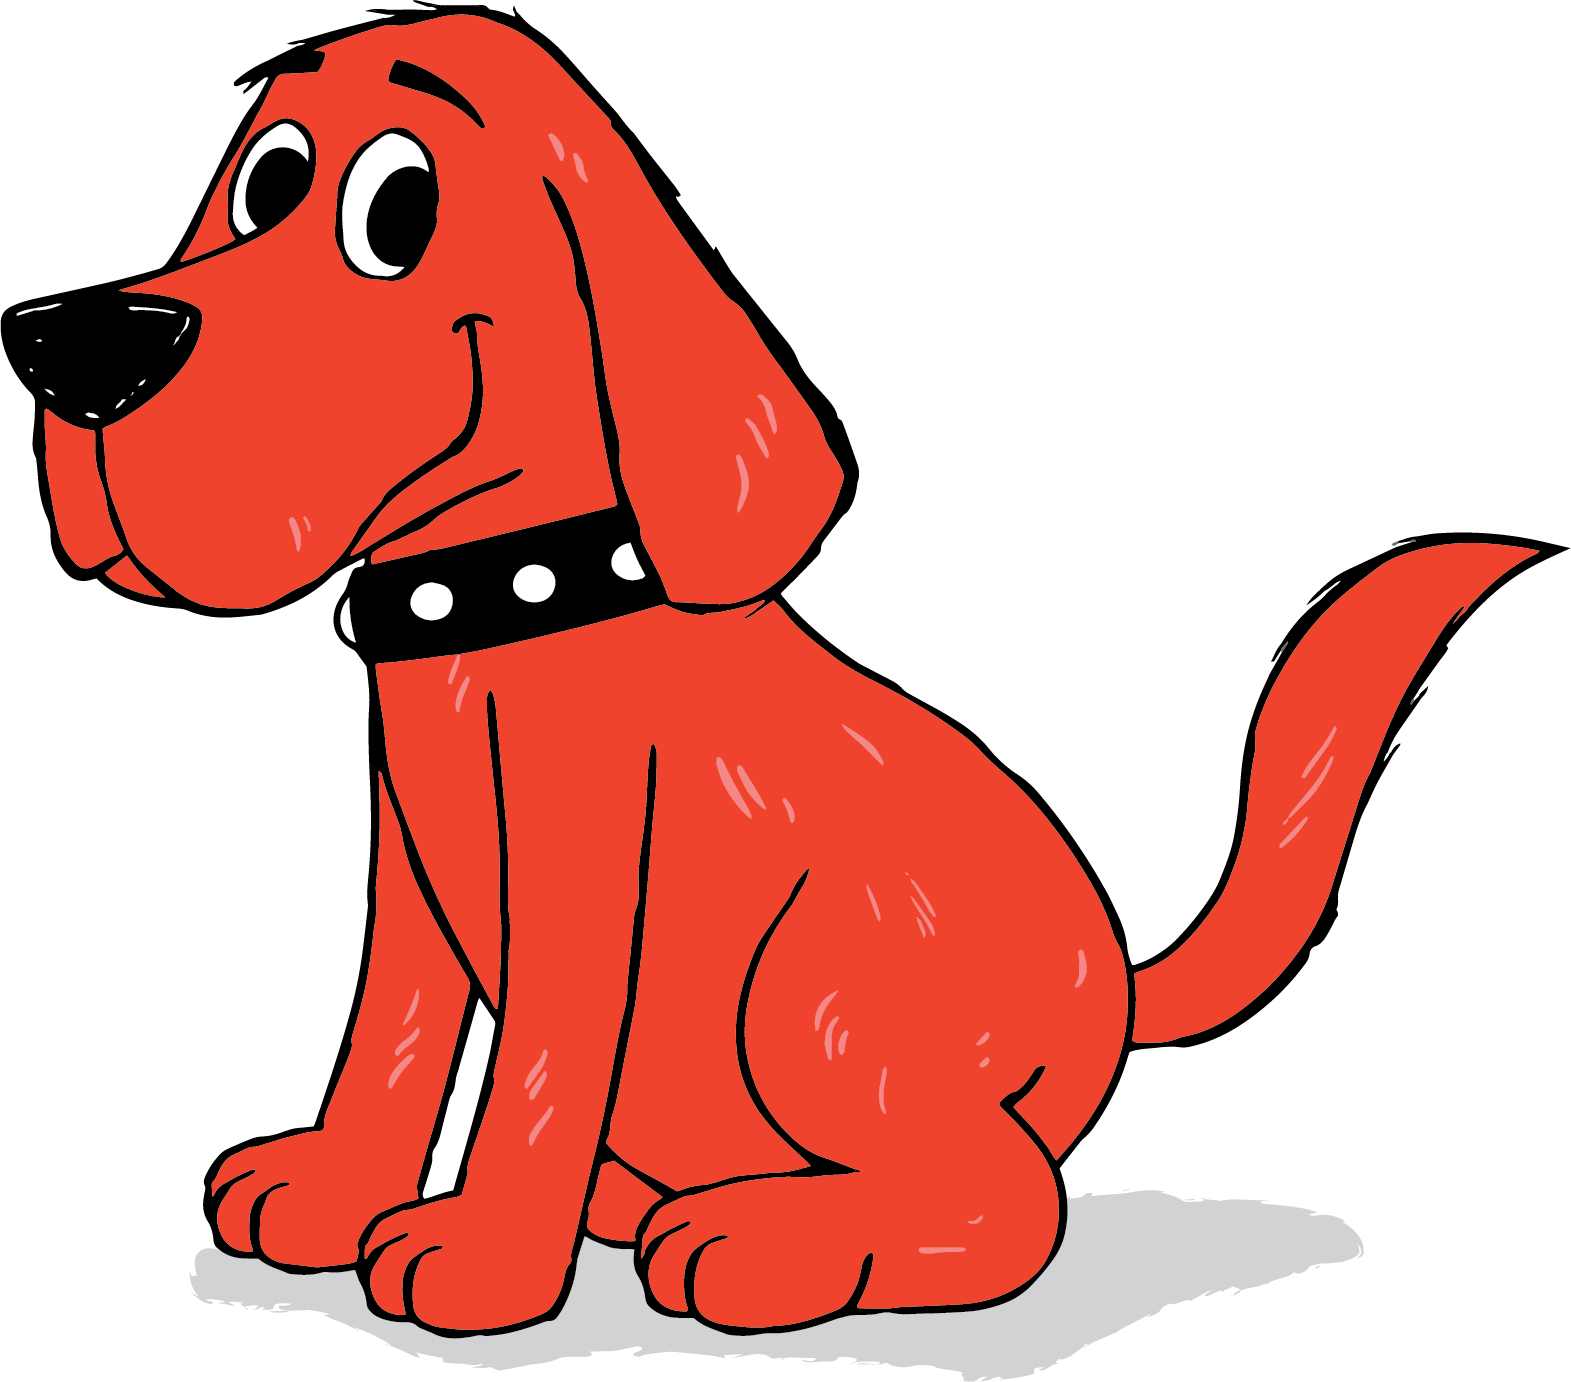 Clifford The Big Red Dog Coming to Little River